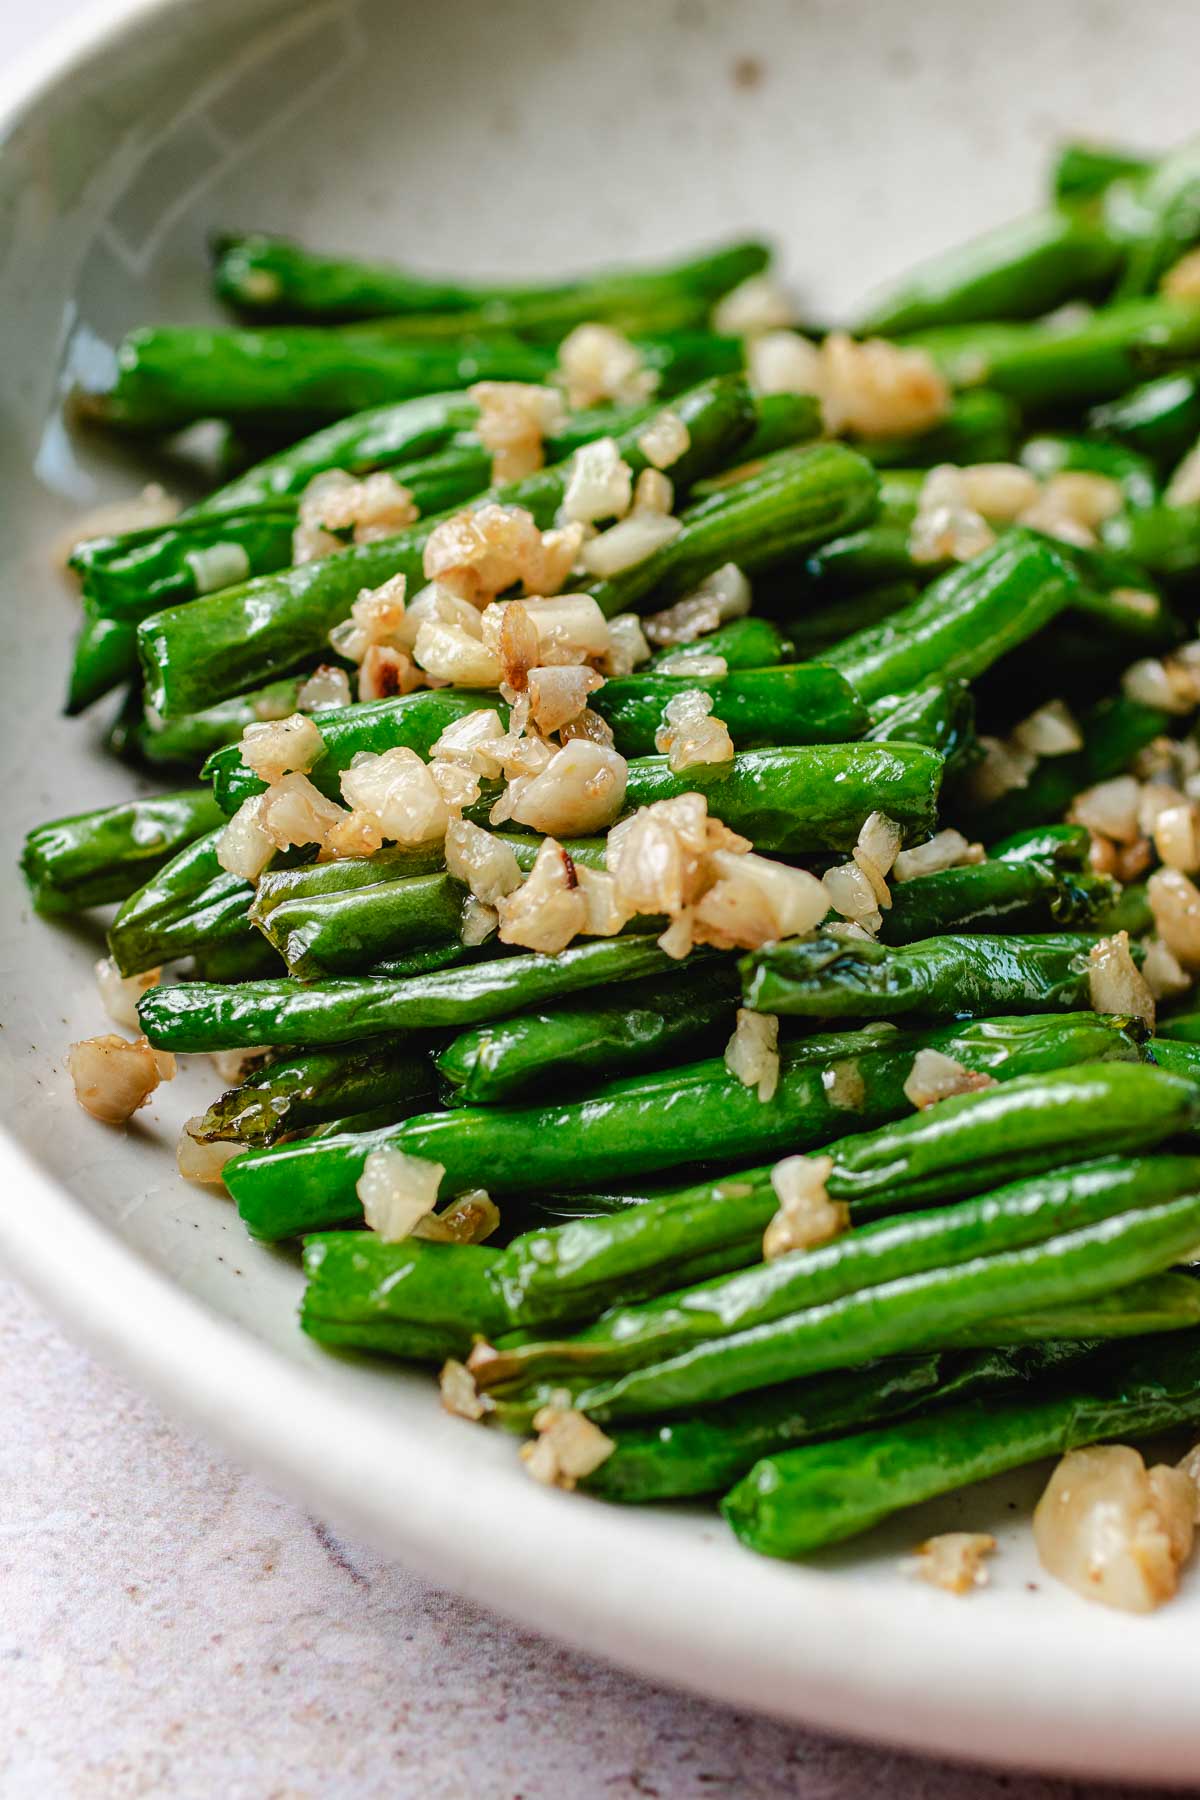 A side close shot photo shows the perfect blistered string beans with loads of minced garlic on top just like the restaraunts.